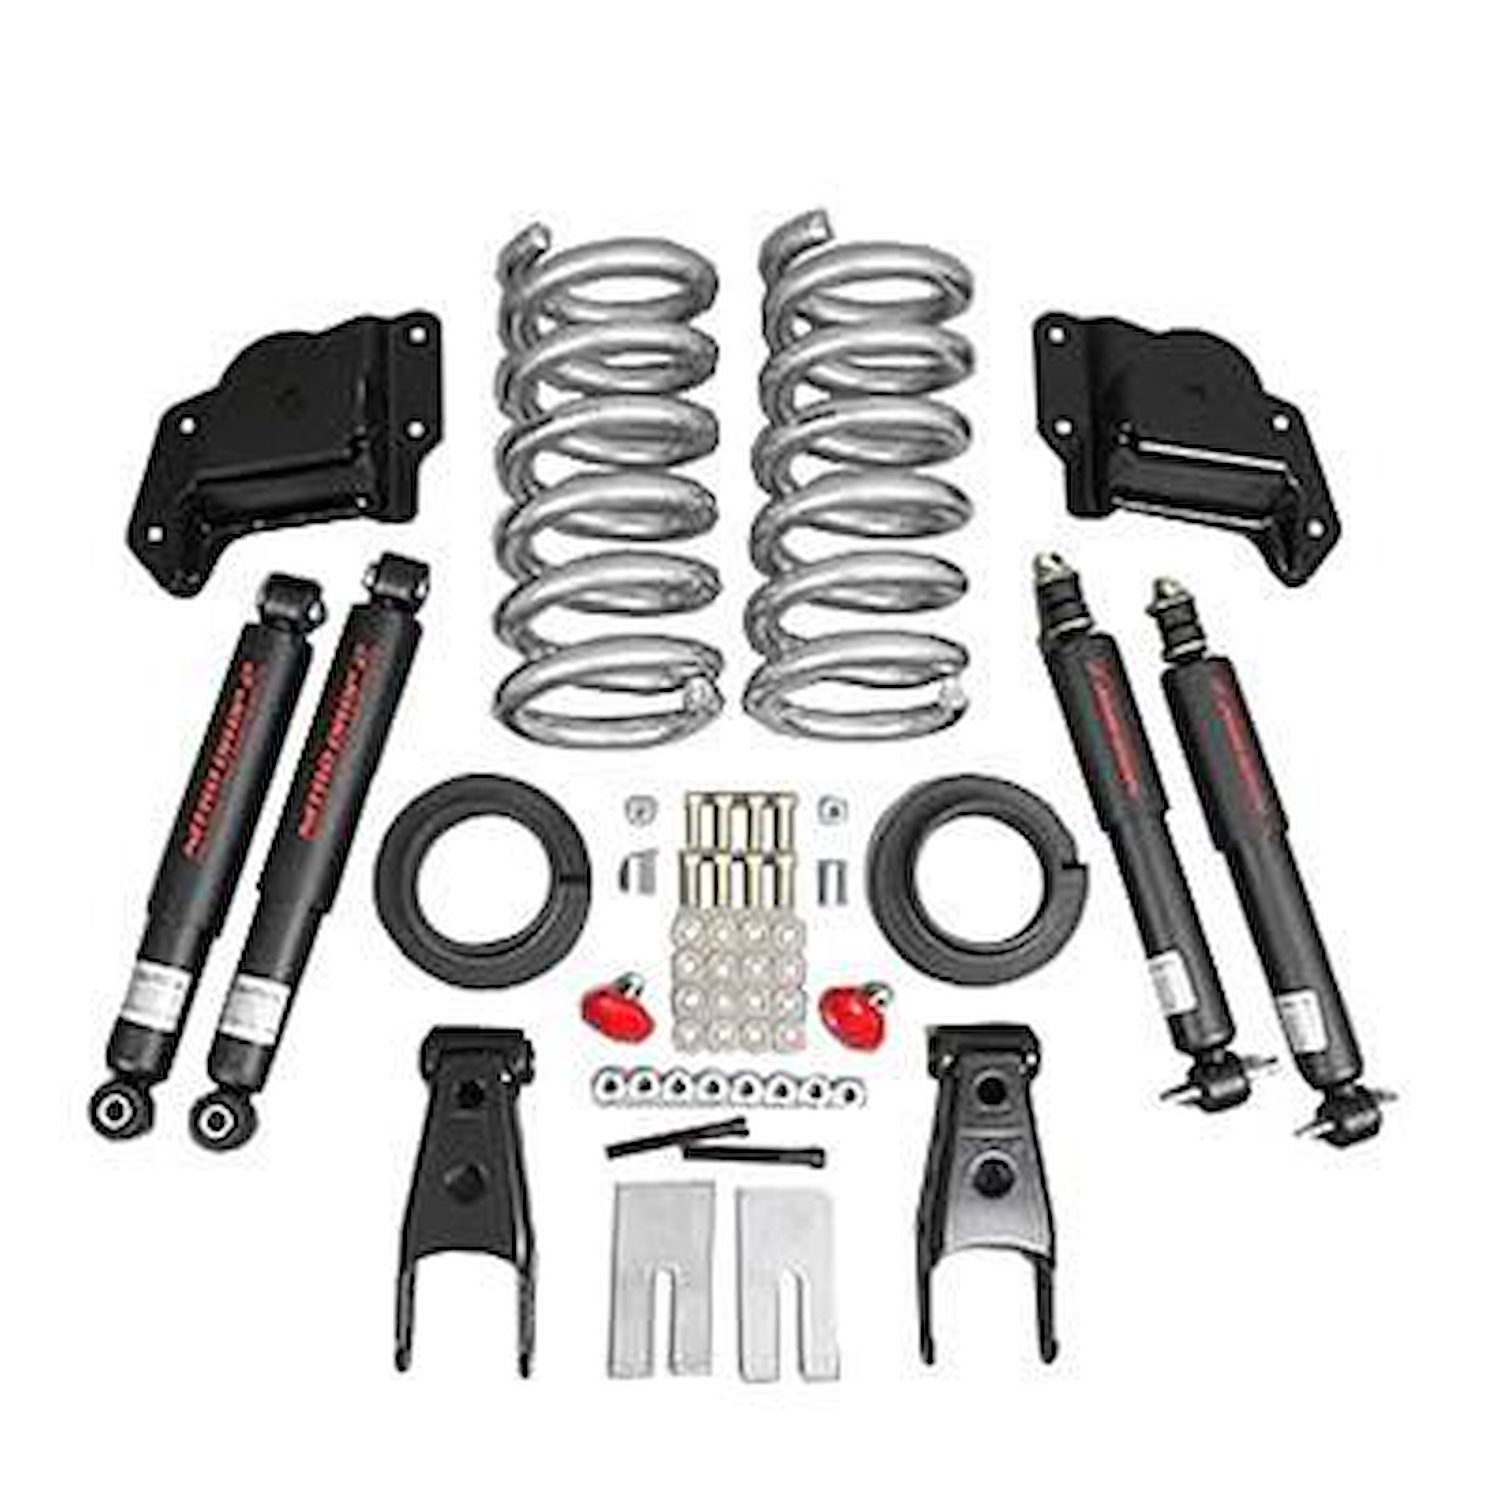 Complete Lowering Kit for 2004-2008 Ford F-150